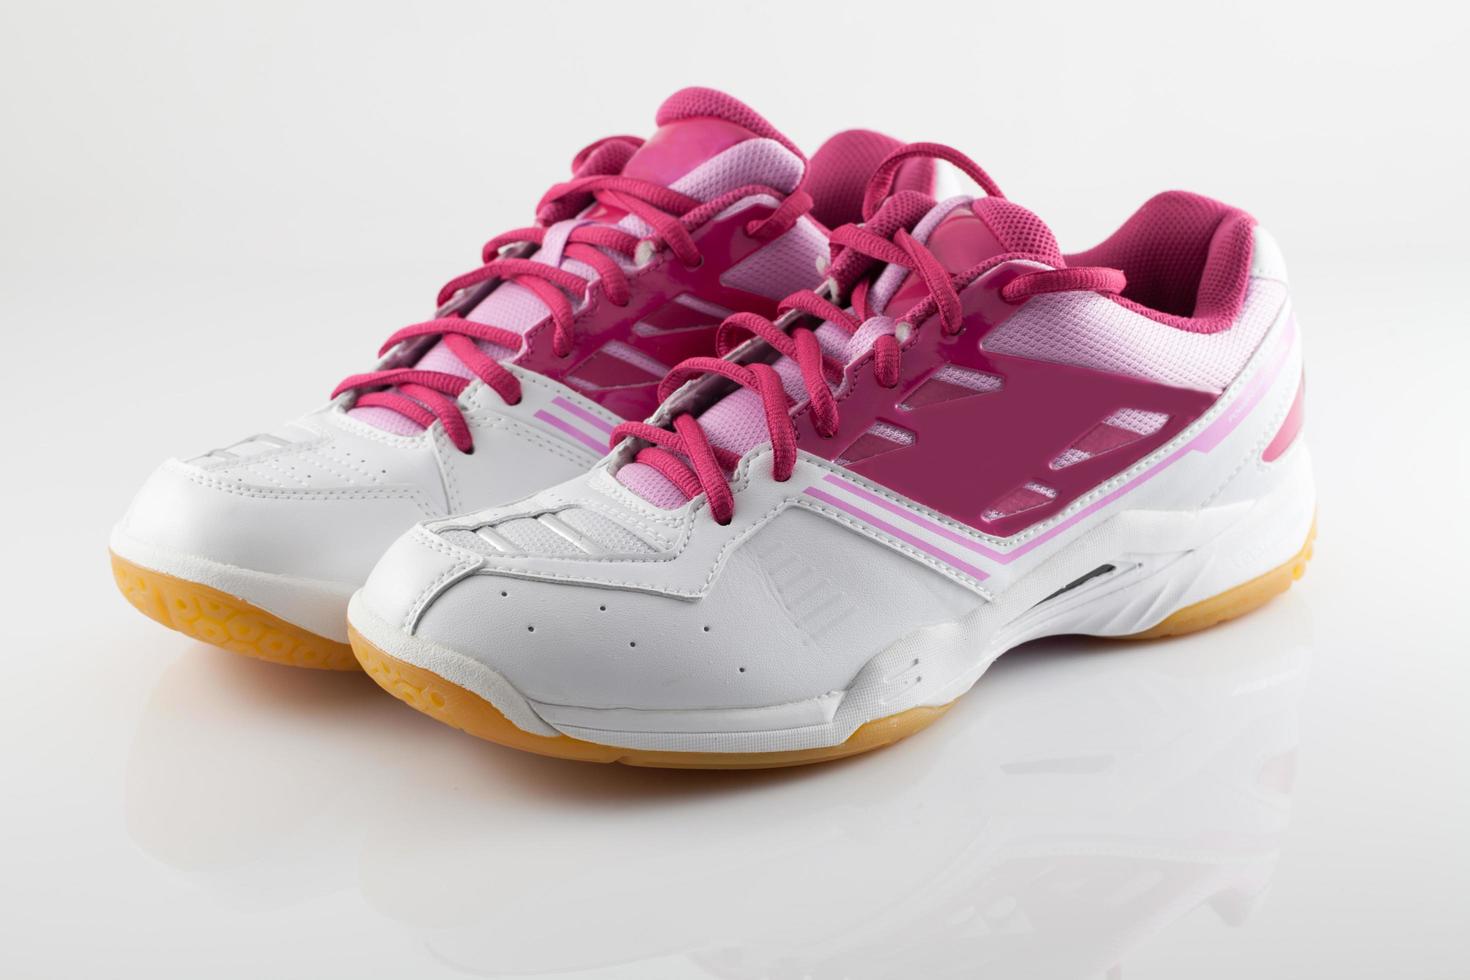 Badminton shoes on pink color photo